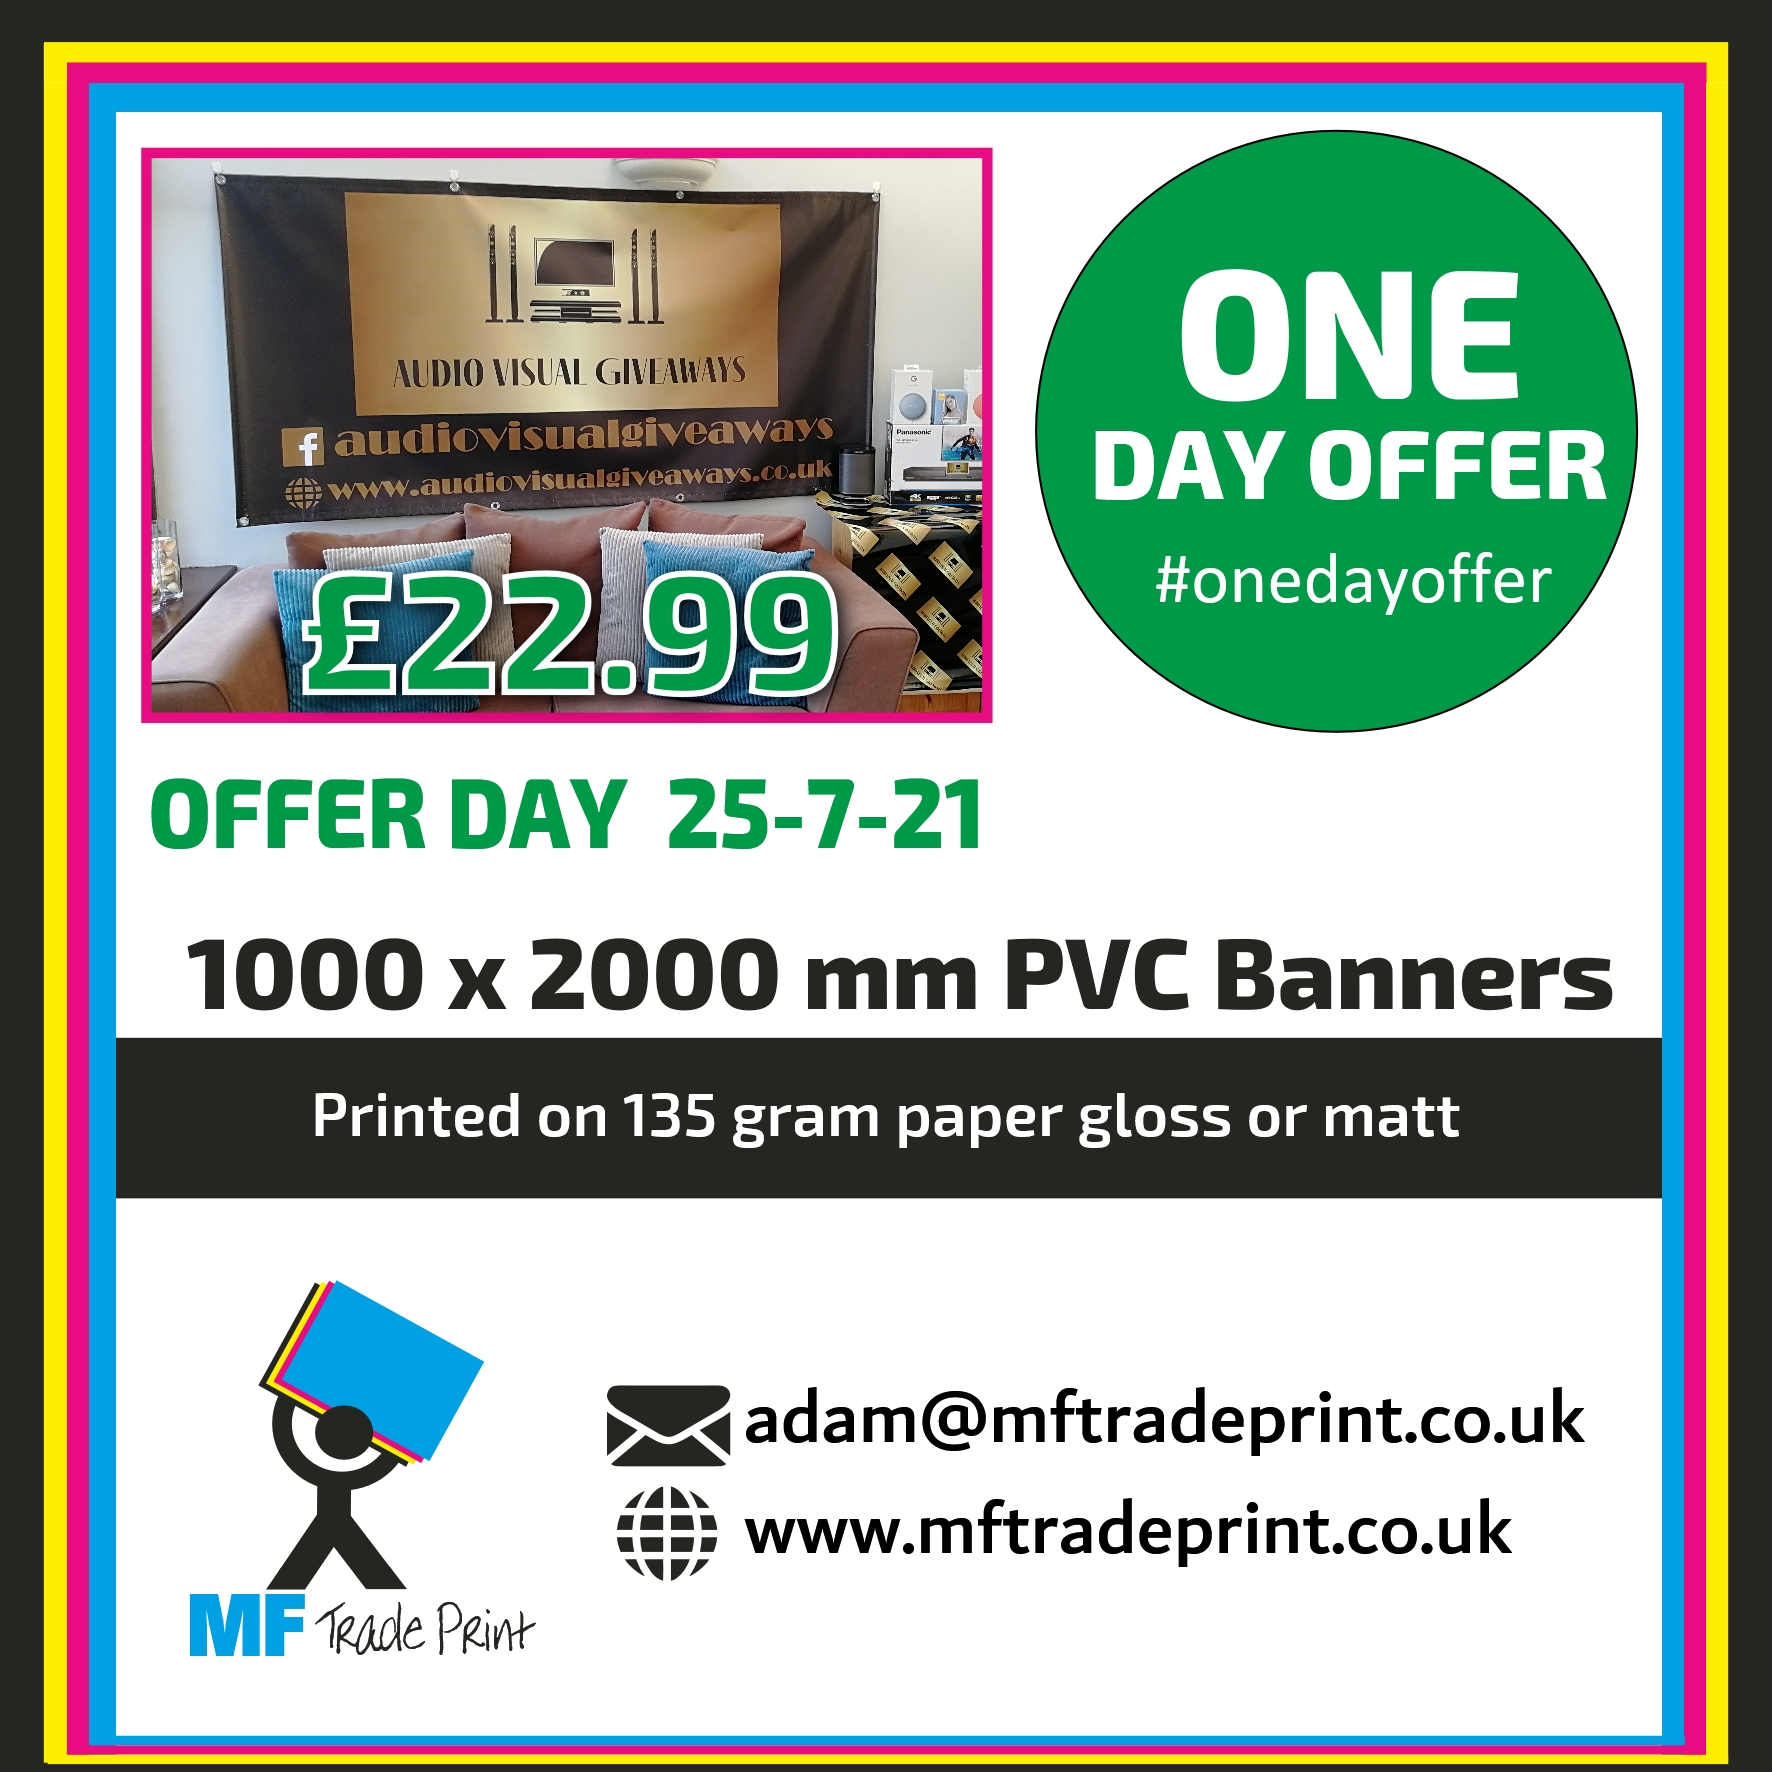 #onedayoffer 1 meter by 2 meter banners offer